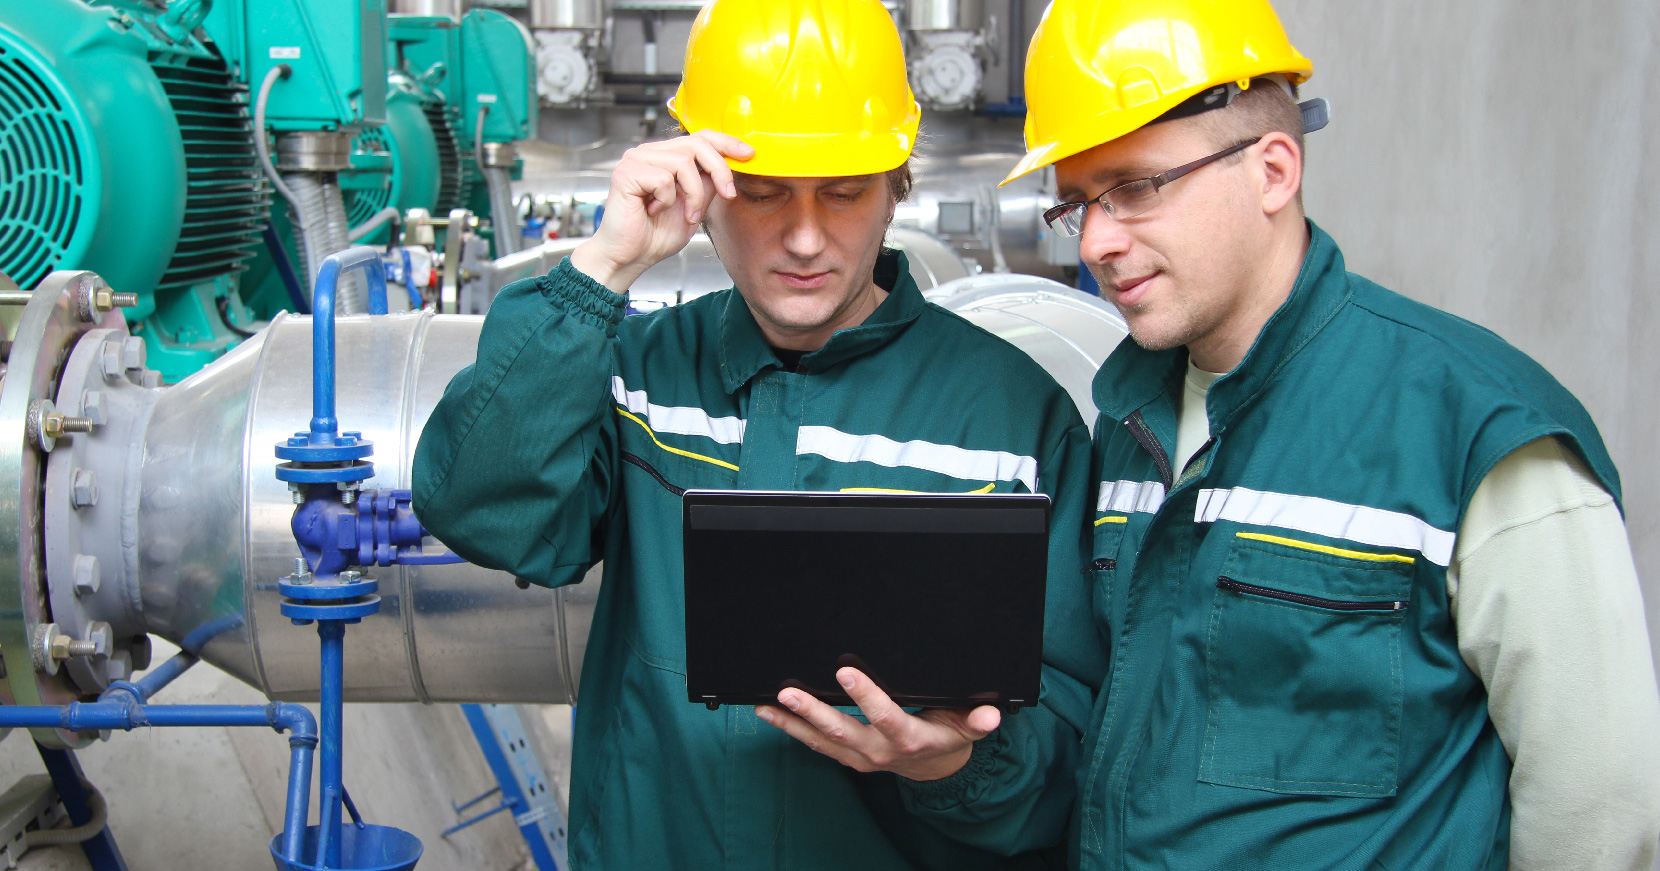 How to achieve excellence in maintenance and reliability?